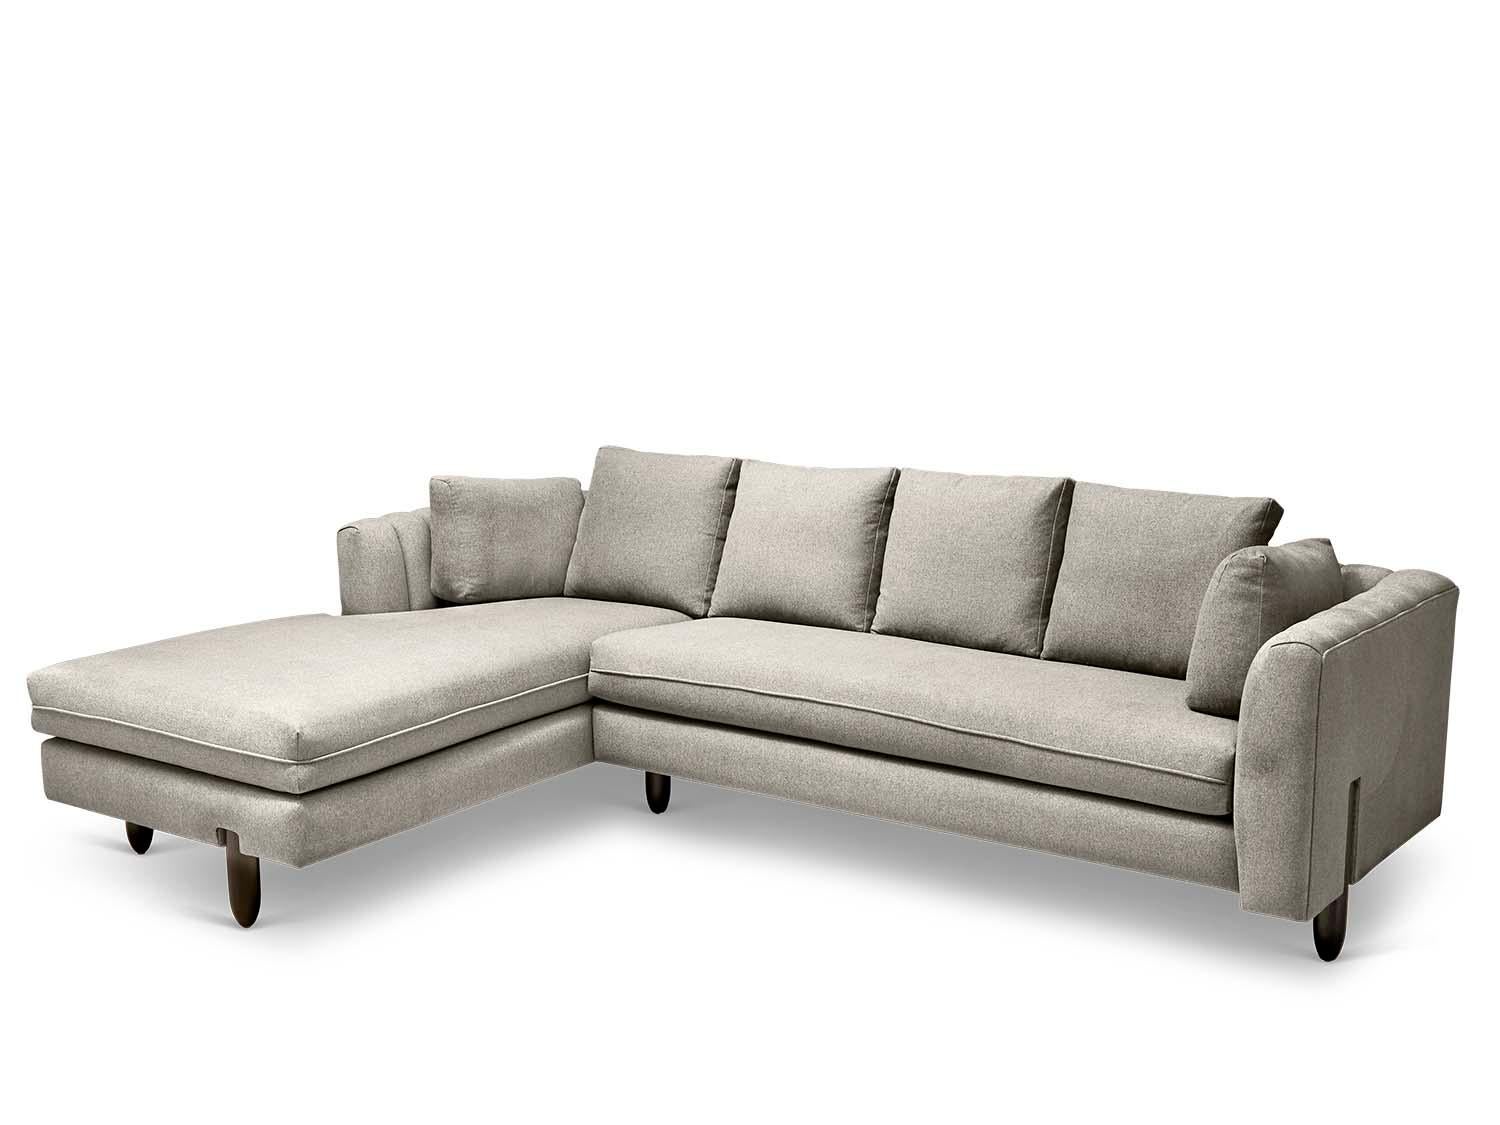 The Isherwood sectional features a channel tufted body with loose bolster cushions. The turned legs are made of solid white oak or American walnut and are inset on the sides revealing the leg detail.

The Lawson-Fenning Collection is designed and